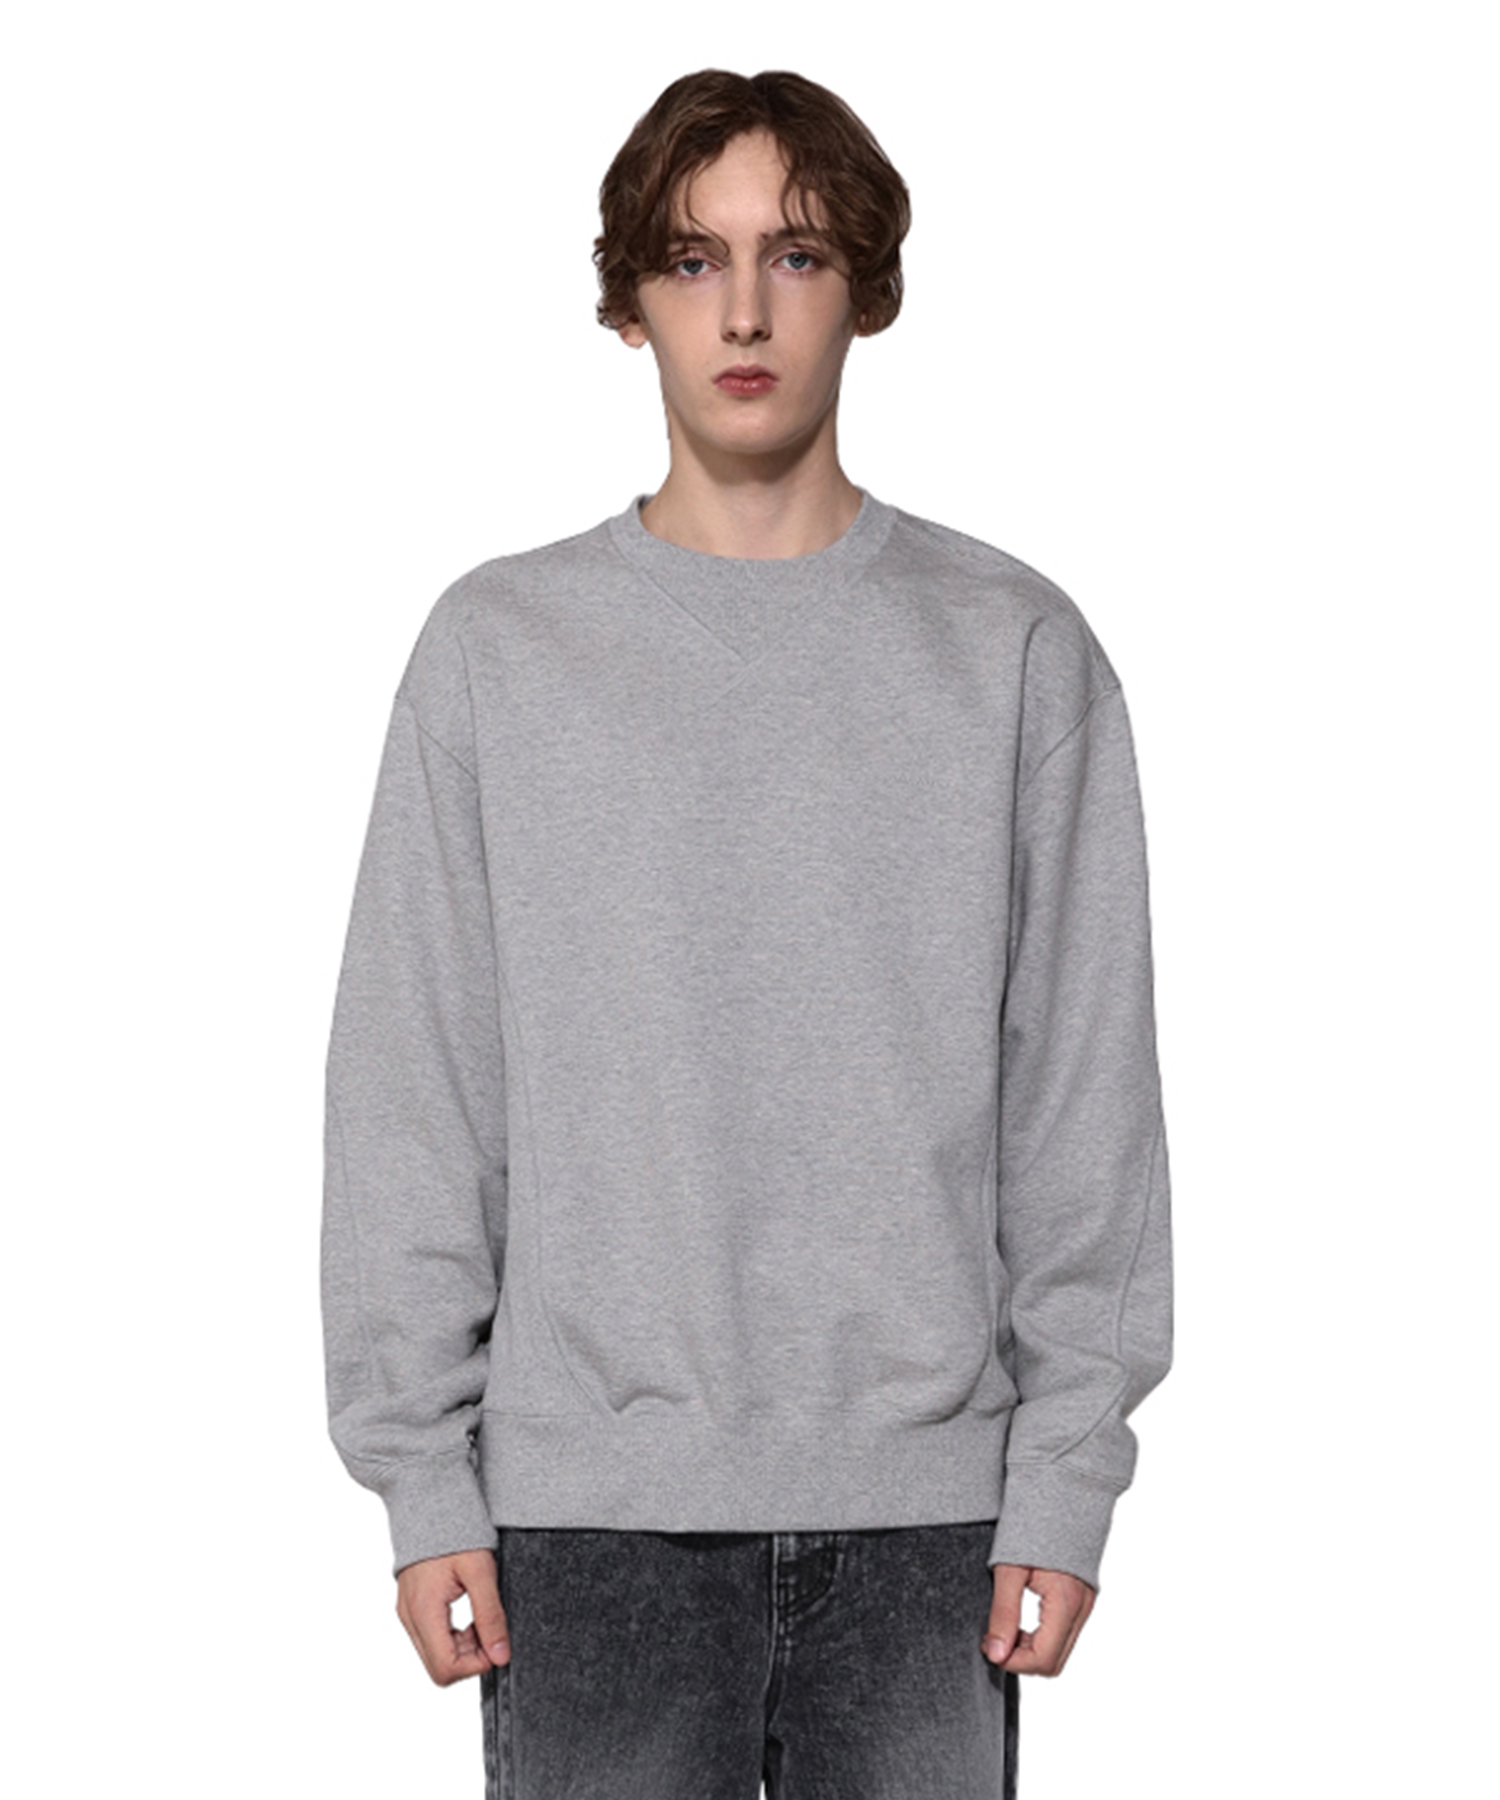 Curved Section Contras Sweatshirt -Grey